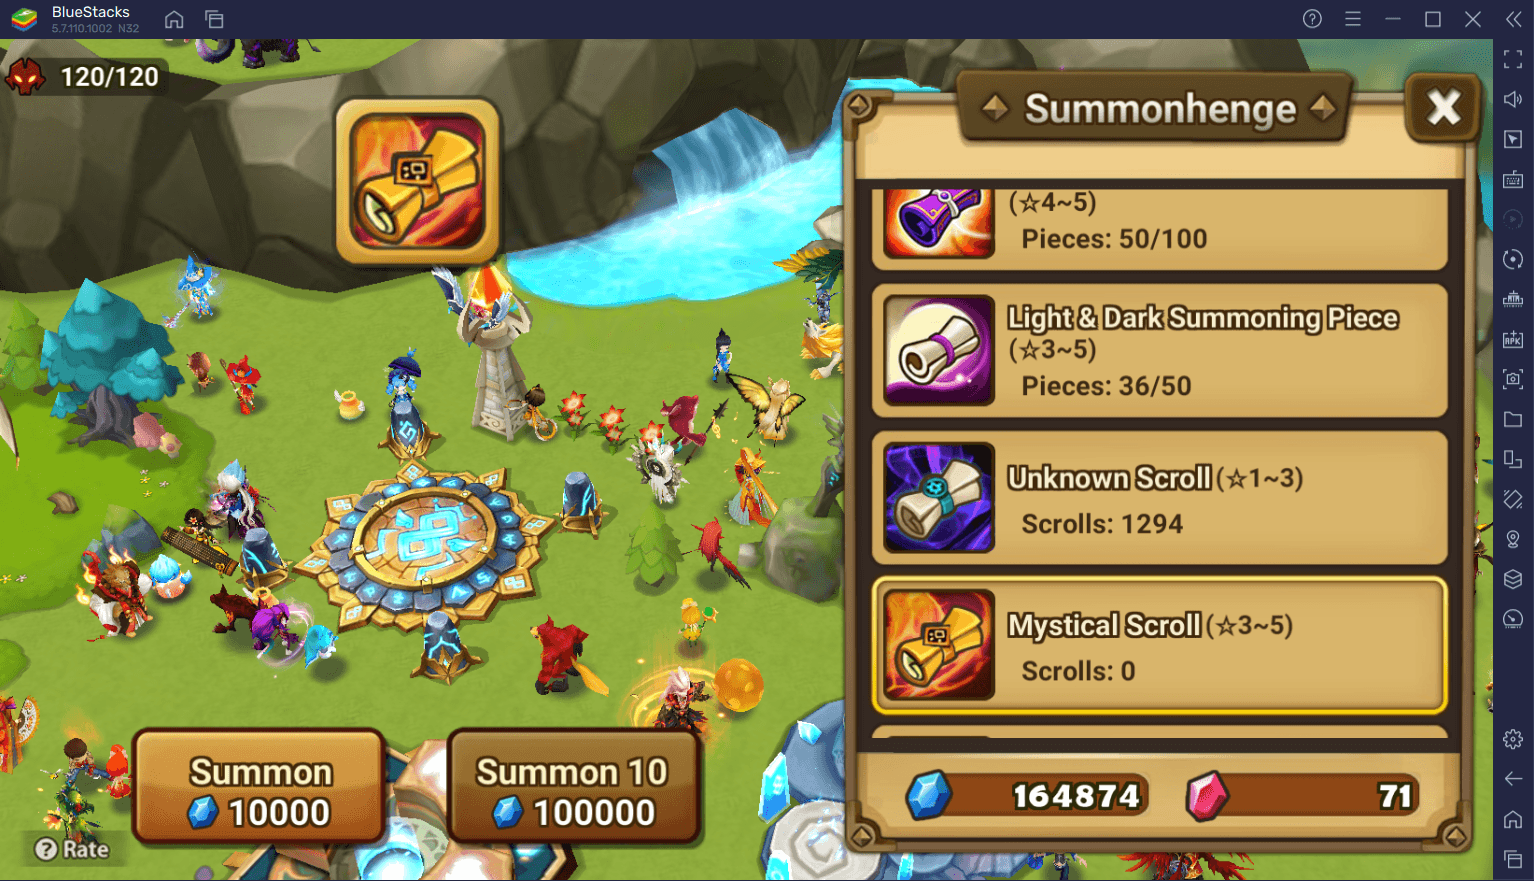 Summoners War: Sky Arena – TOA Auto-Play, 10 Multi-Summon Feature, and much more added in Patch 6.6.3